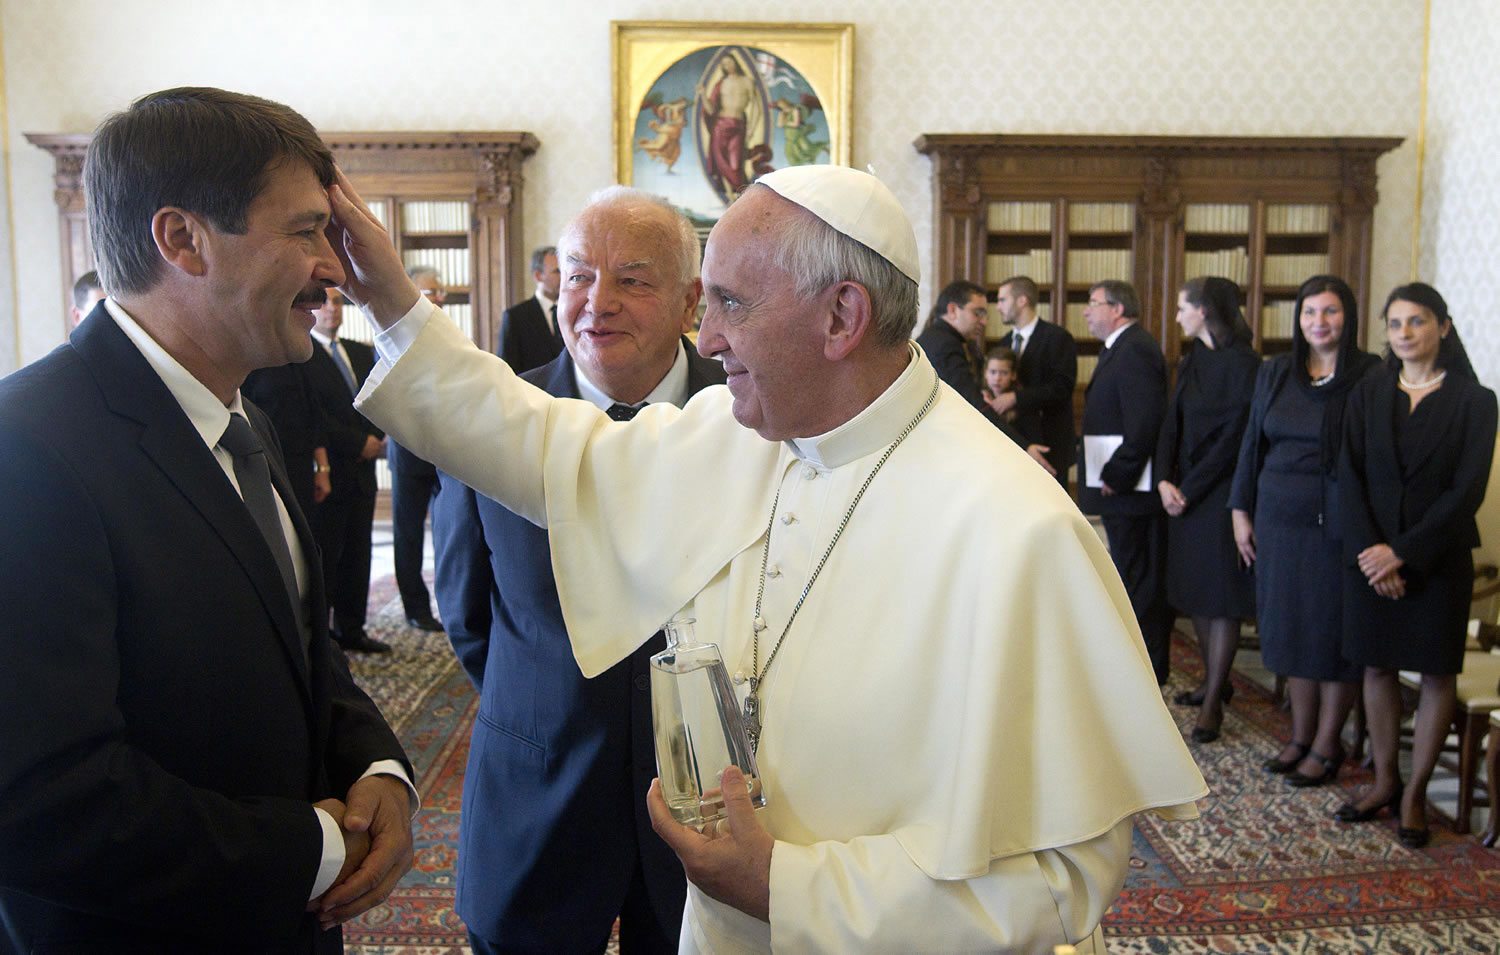 Pope Francis meets Hungarian President Janos Ader during a private audience at the Vatican on Friday.